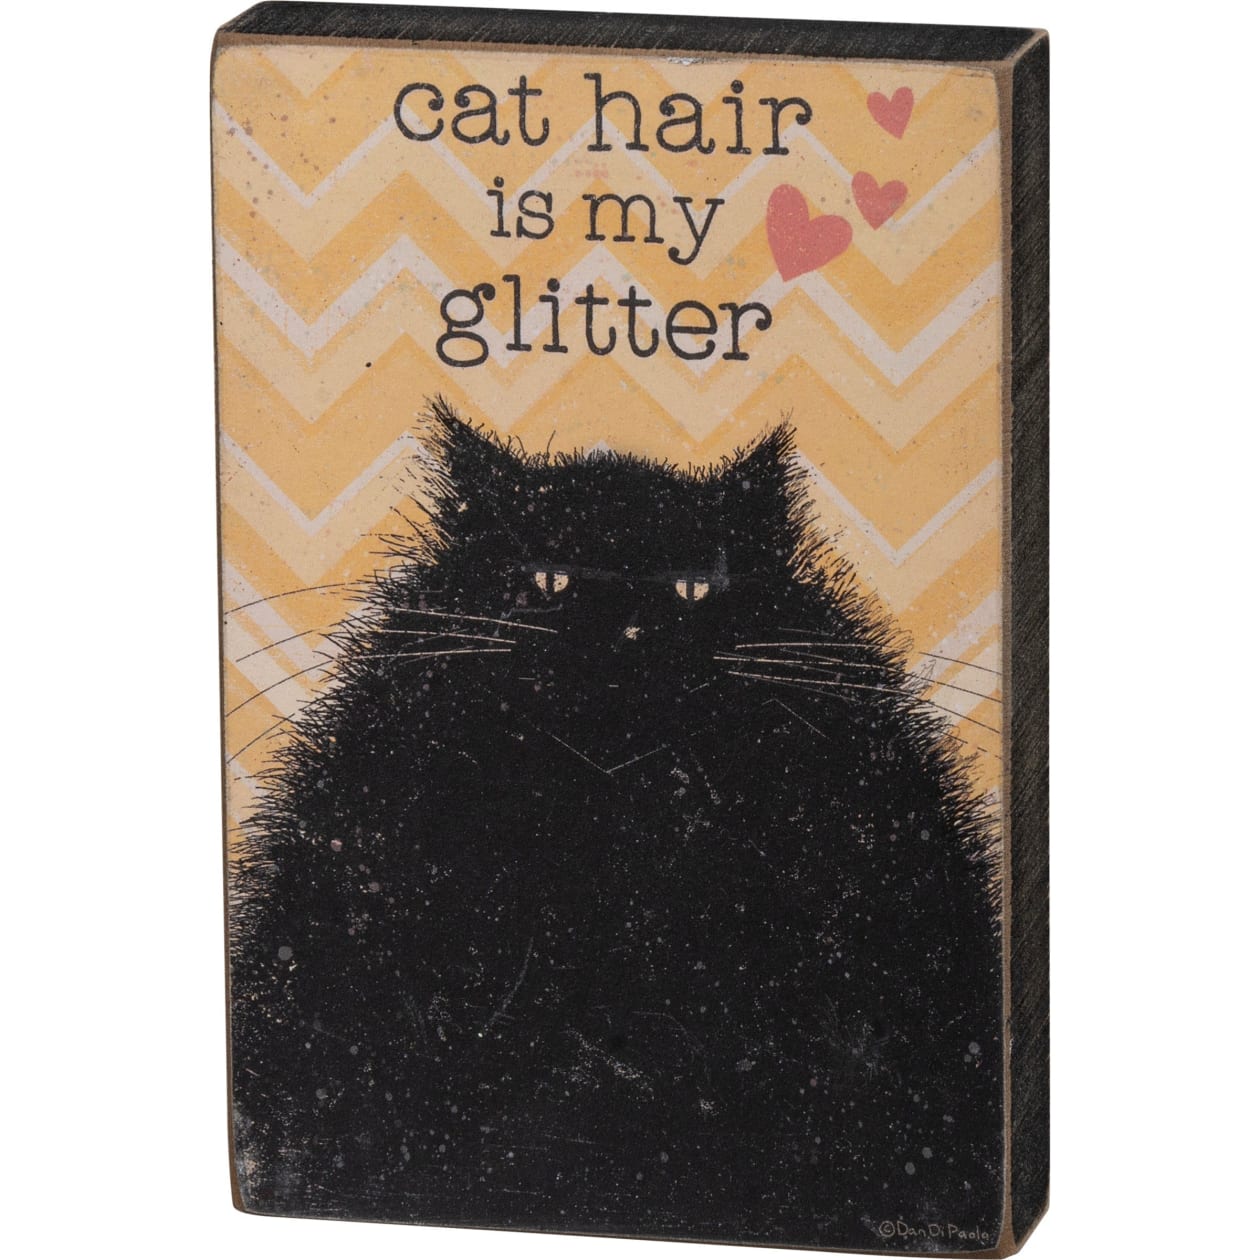 Cat Hair Is My Glitter Block Sign | Freestanding or Hangable | Wood Wall or Table Decor